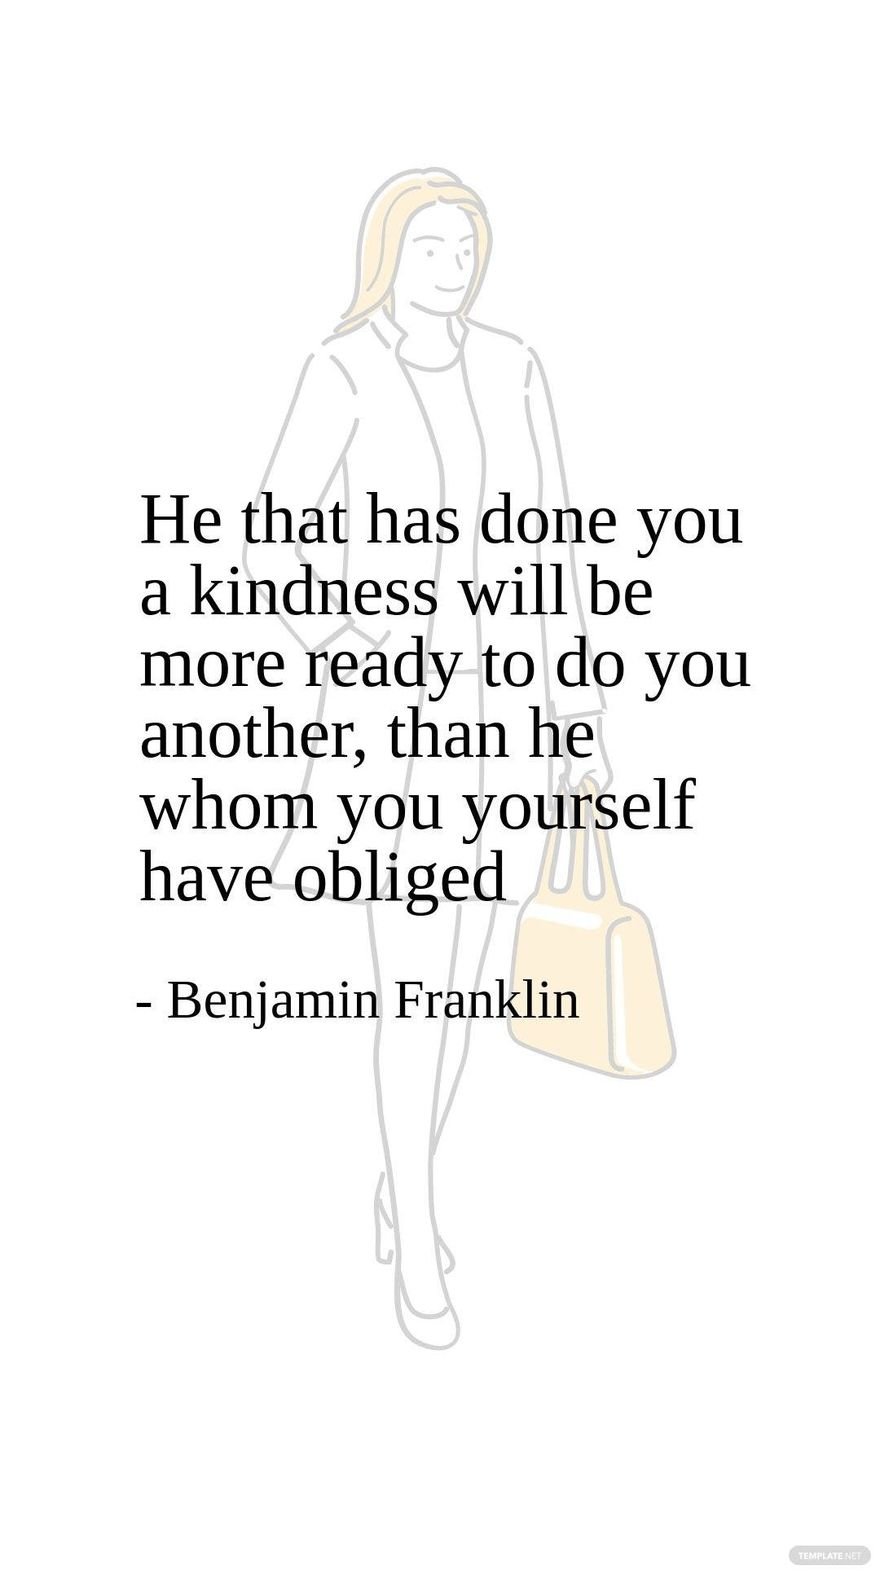 Benjamin Franklin - He that has done you a kindness will be more ready to do you another, than he whom you yourself have obliged